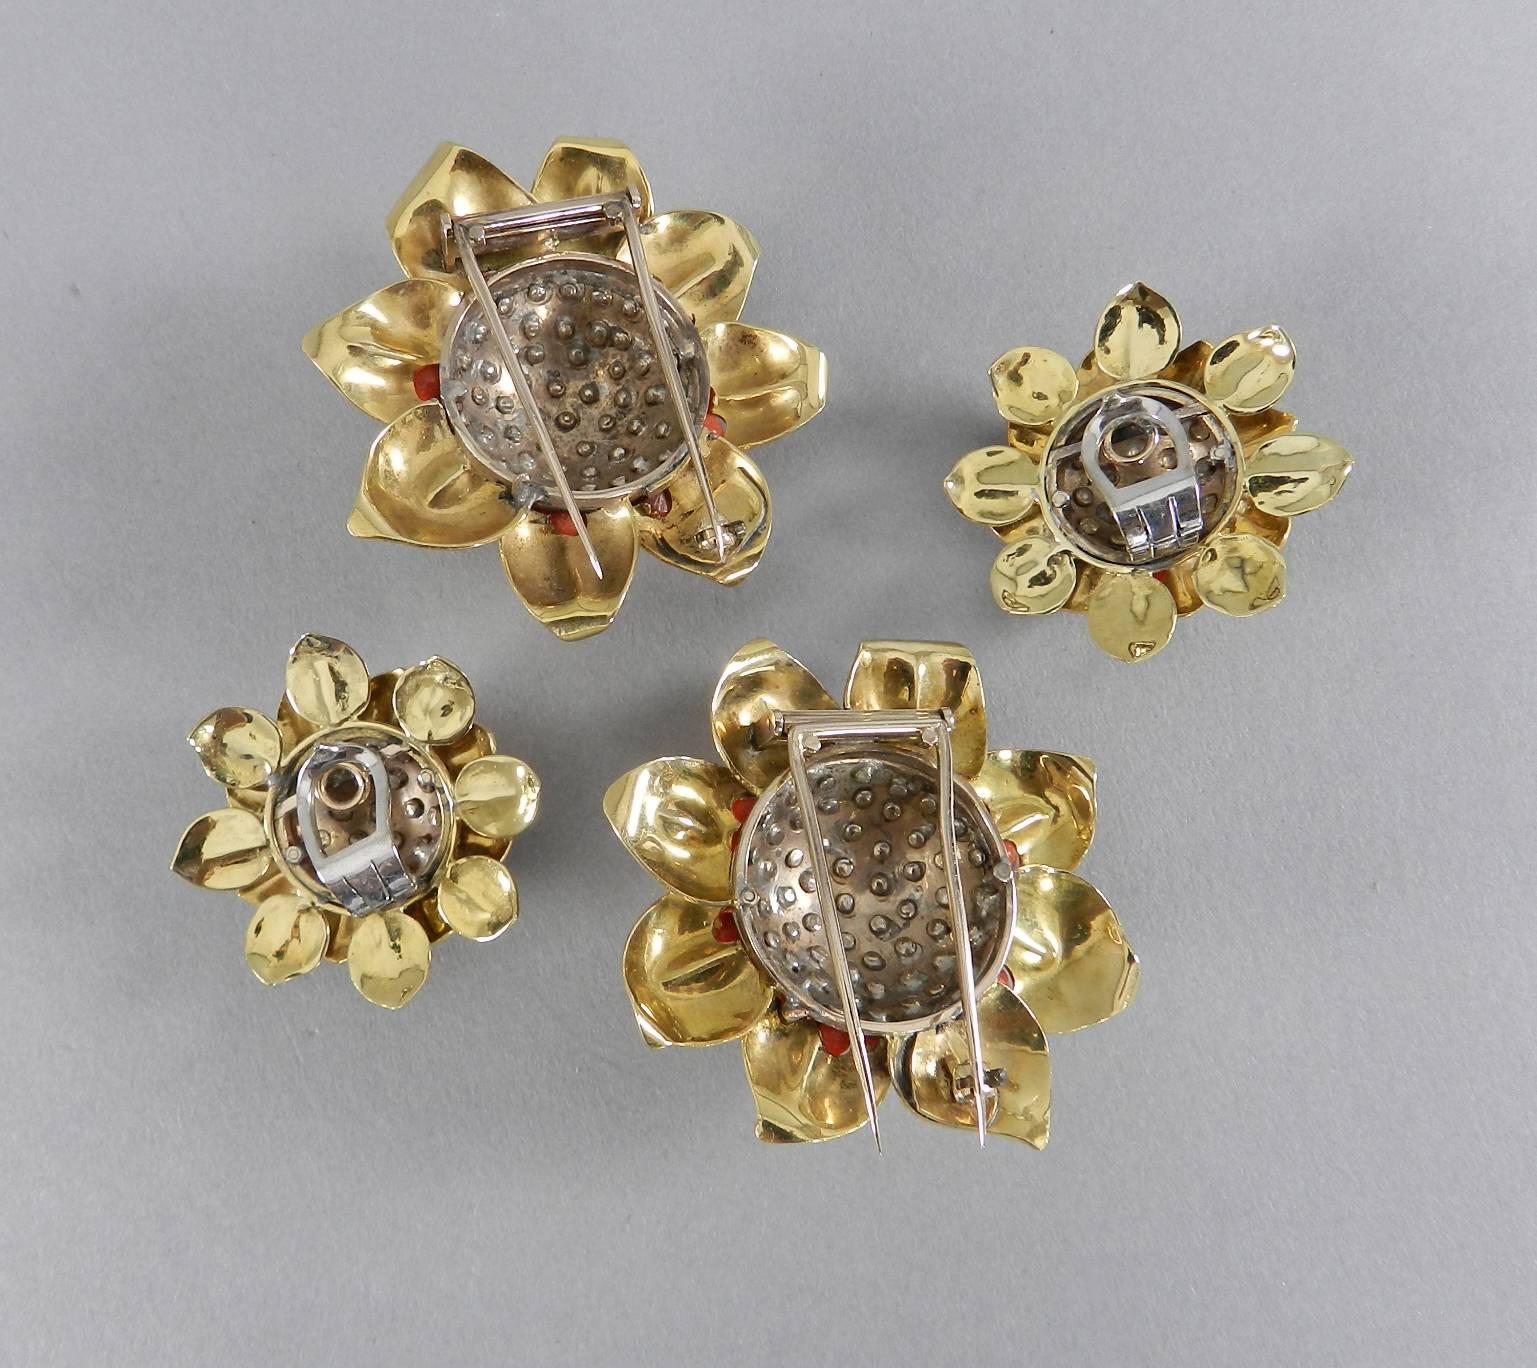  Circa 1950's retro coral beaded flower dress clips and earrings set. 18k yellow gold. Earrings measure approximately 1-3/8" and dress clips 2" . Excellent vintage condition. Total weight 95.7 grams. 

We ship worldwide.